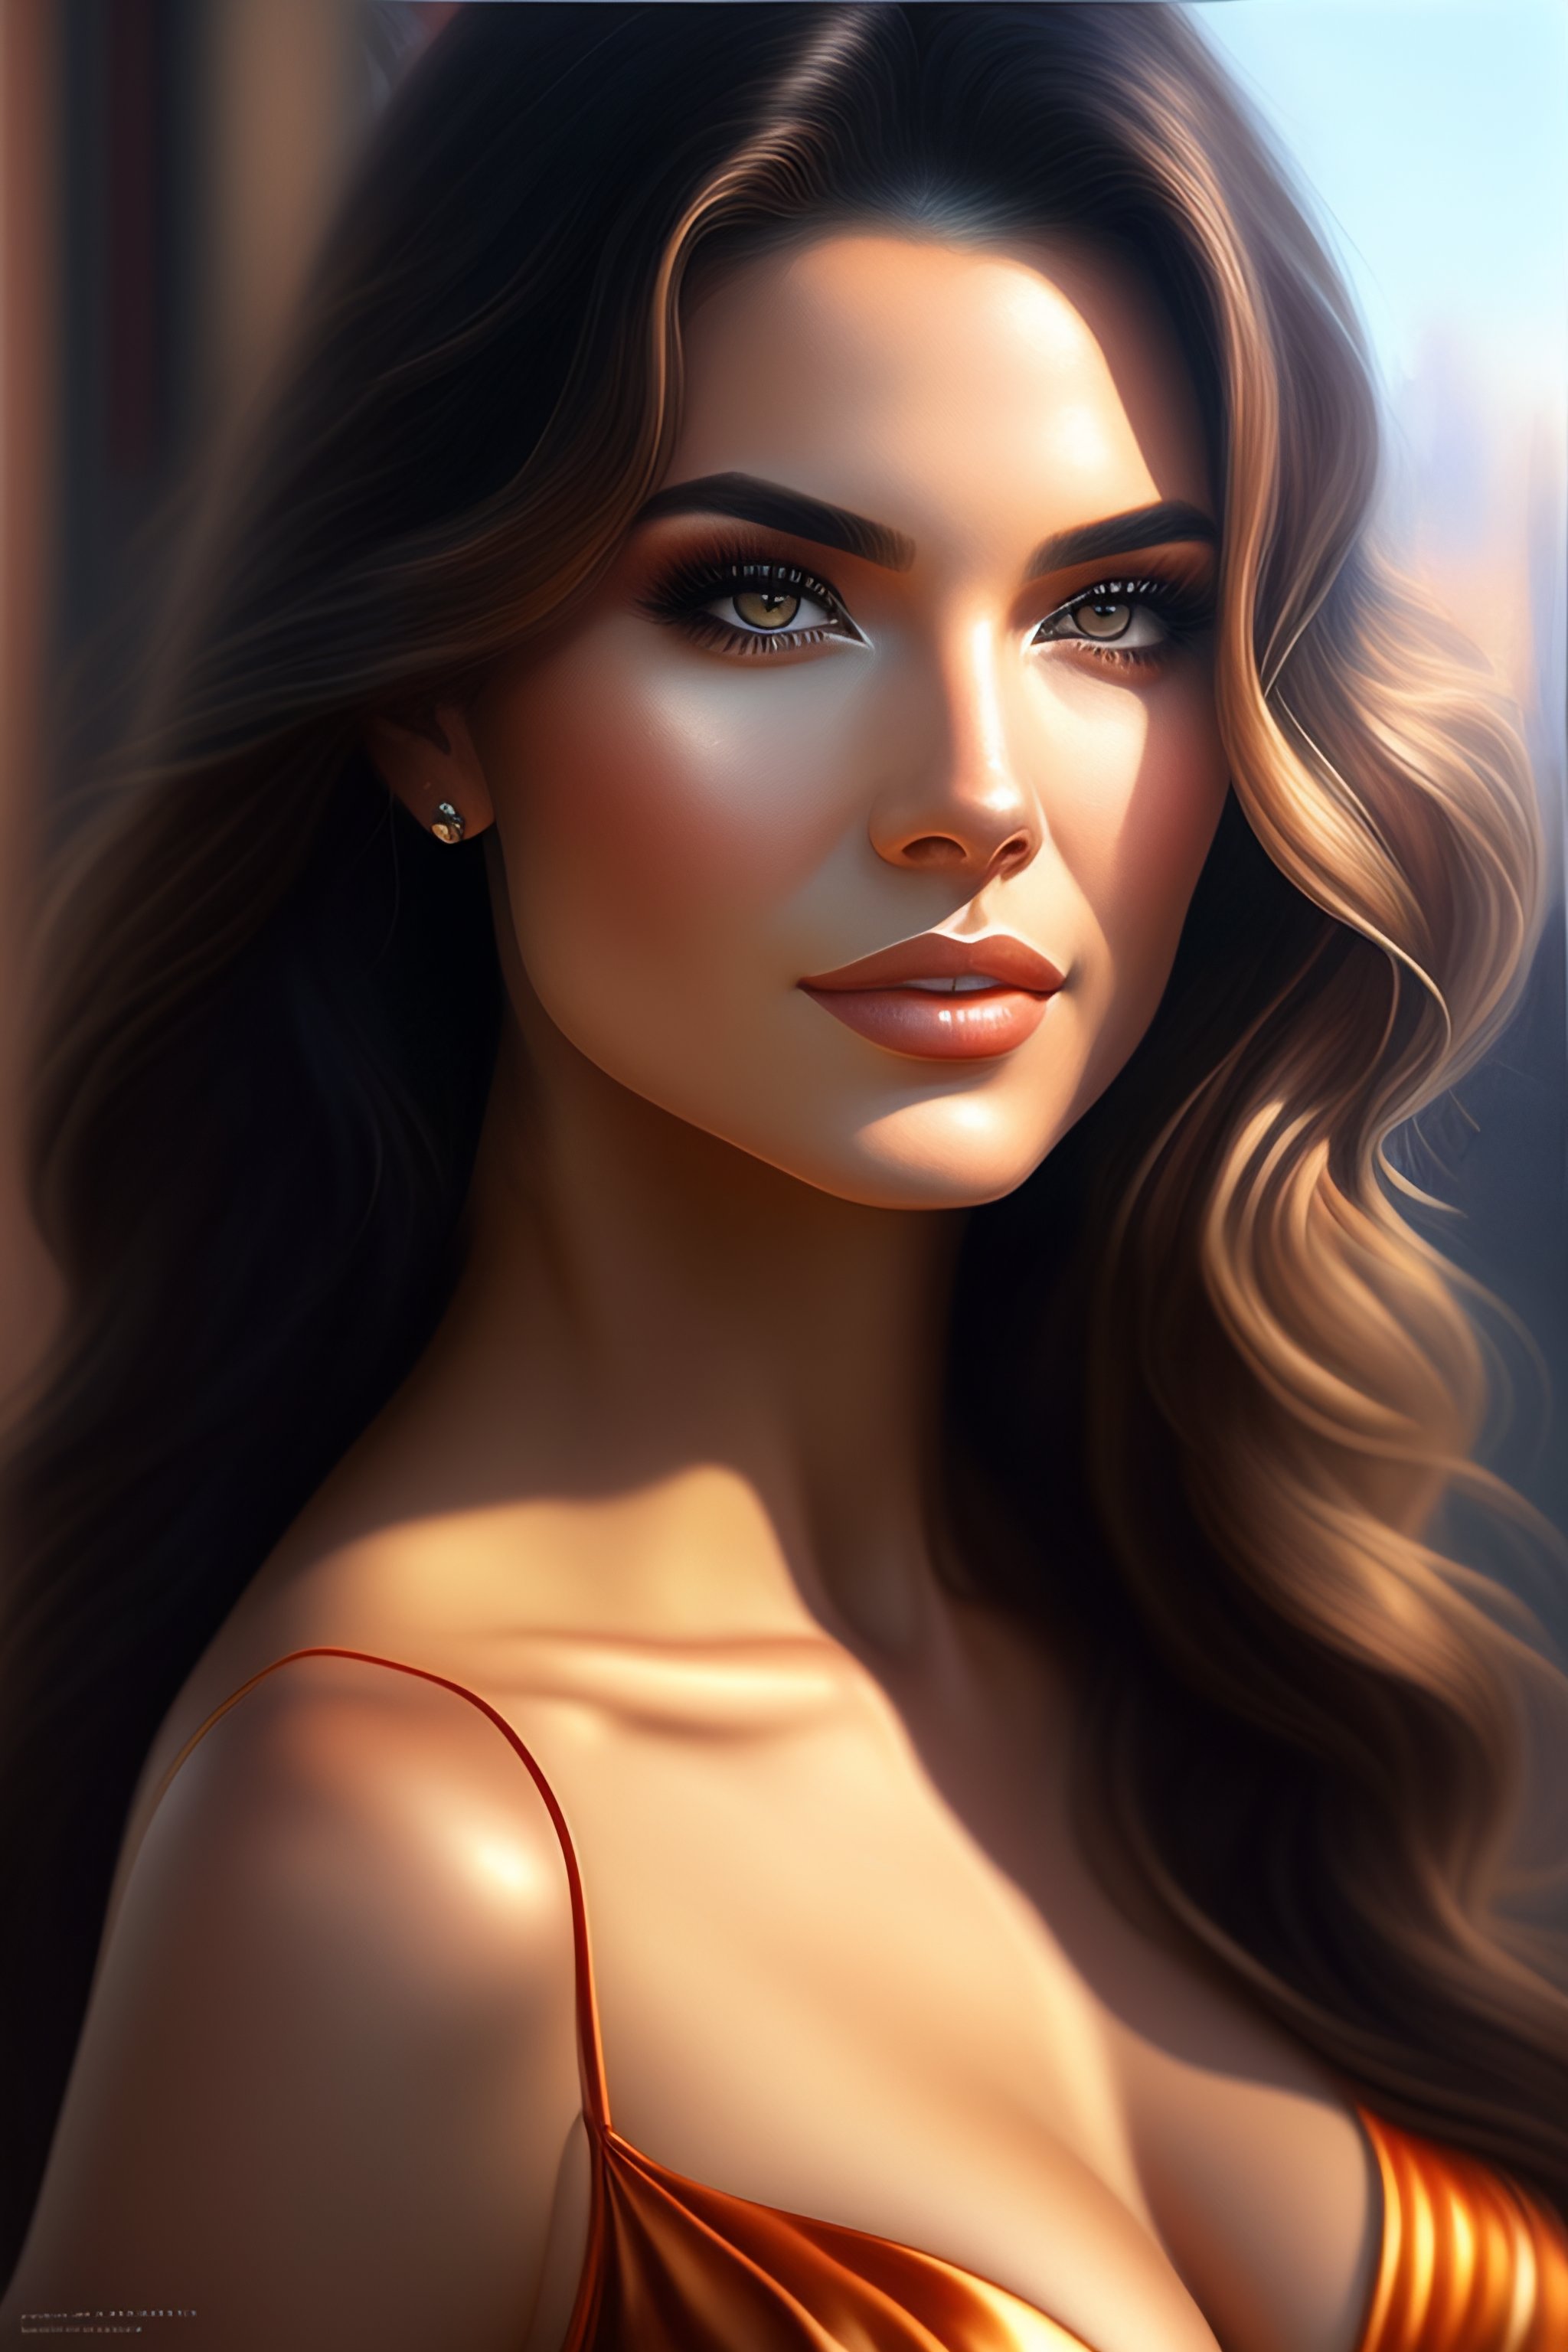 Lexica - Photo of a gorgeous woman in the style of stefan kostic ...